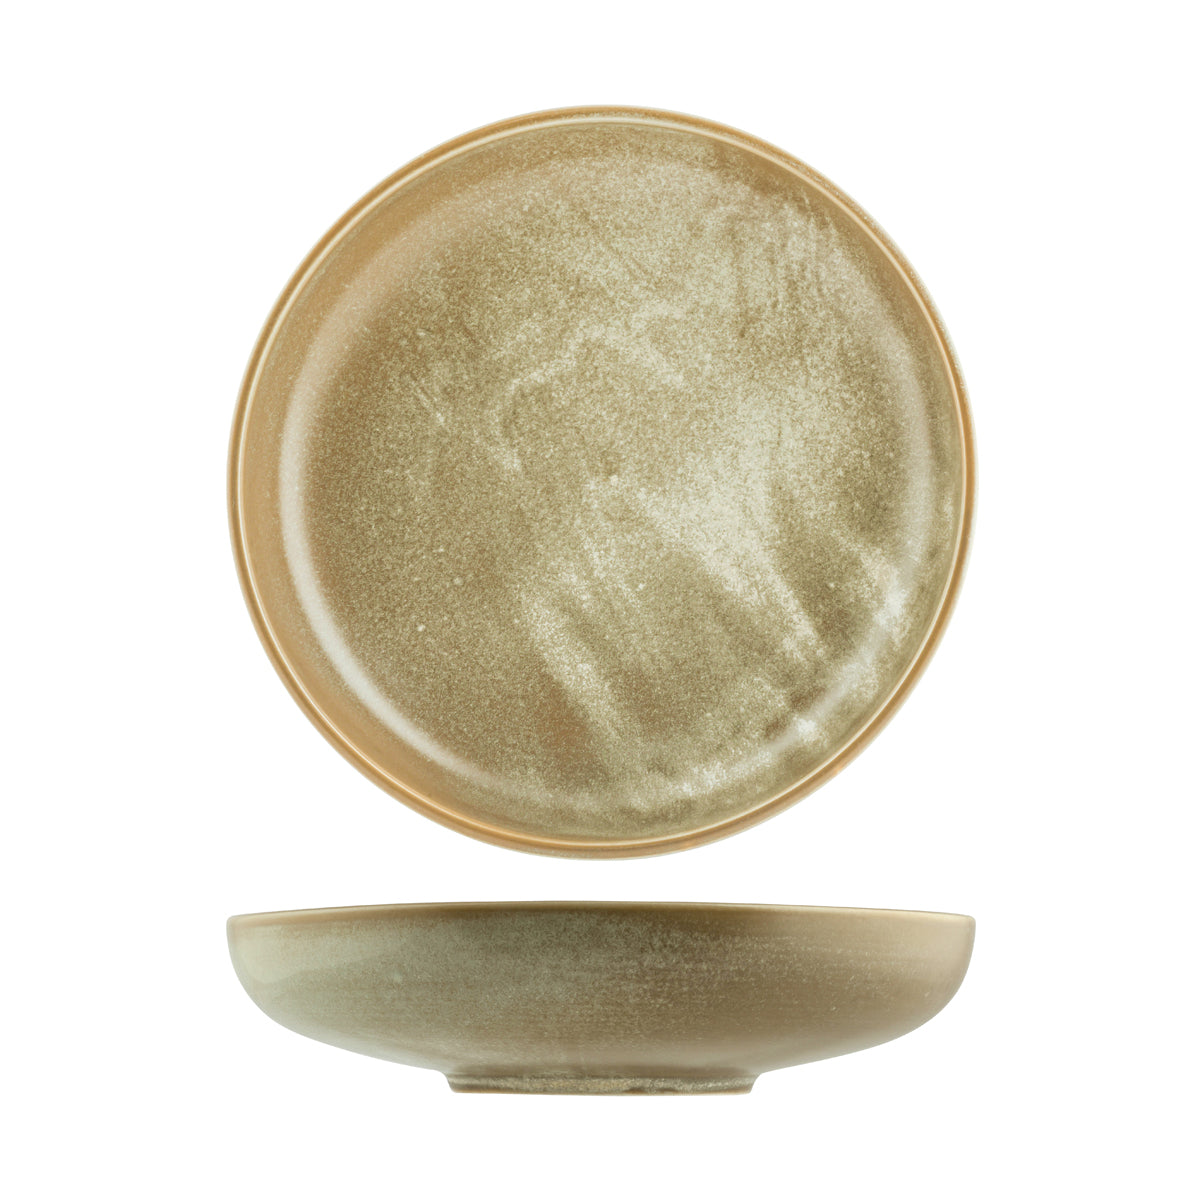 Round Bowl - 245mm, 1630ml, Chic from Moda Porcelain. made out of Porcelain and sold in boxes of 4. Hospitality quality at wholesale price with The Flying Fork! 